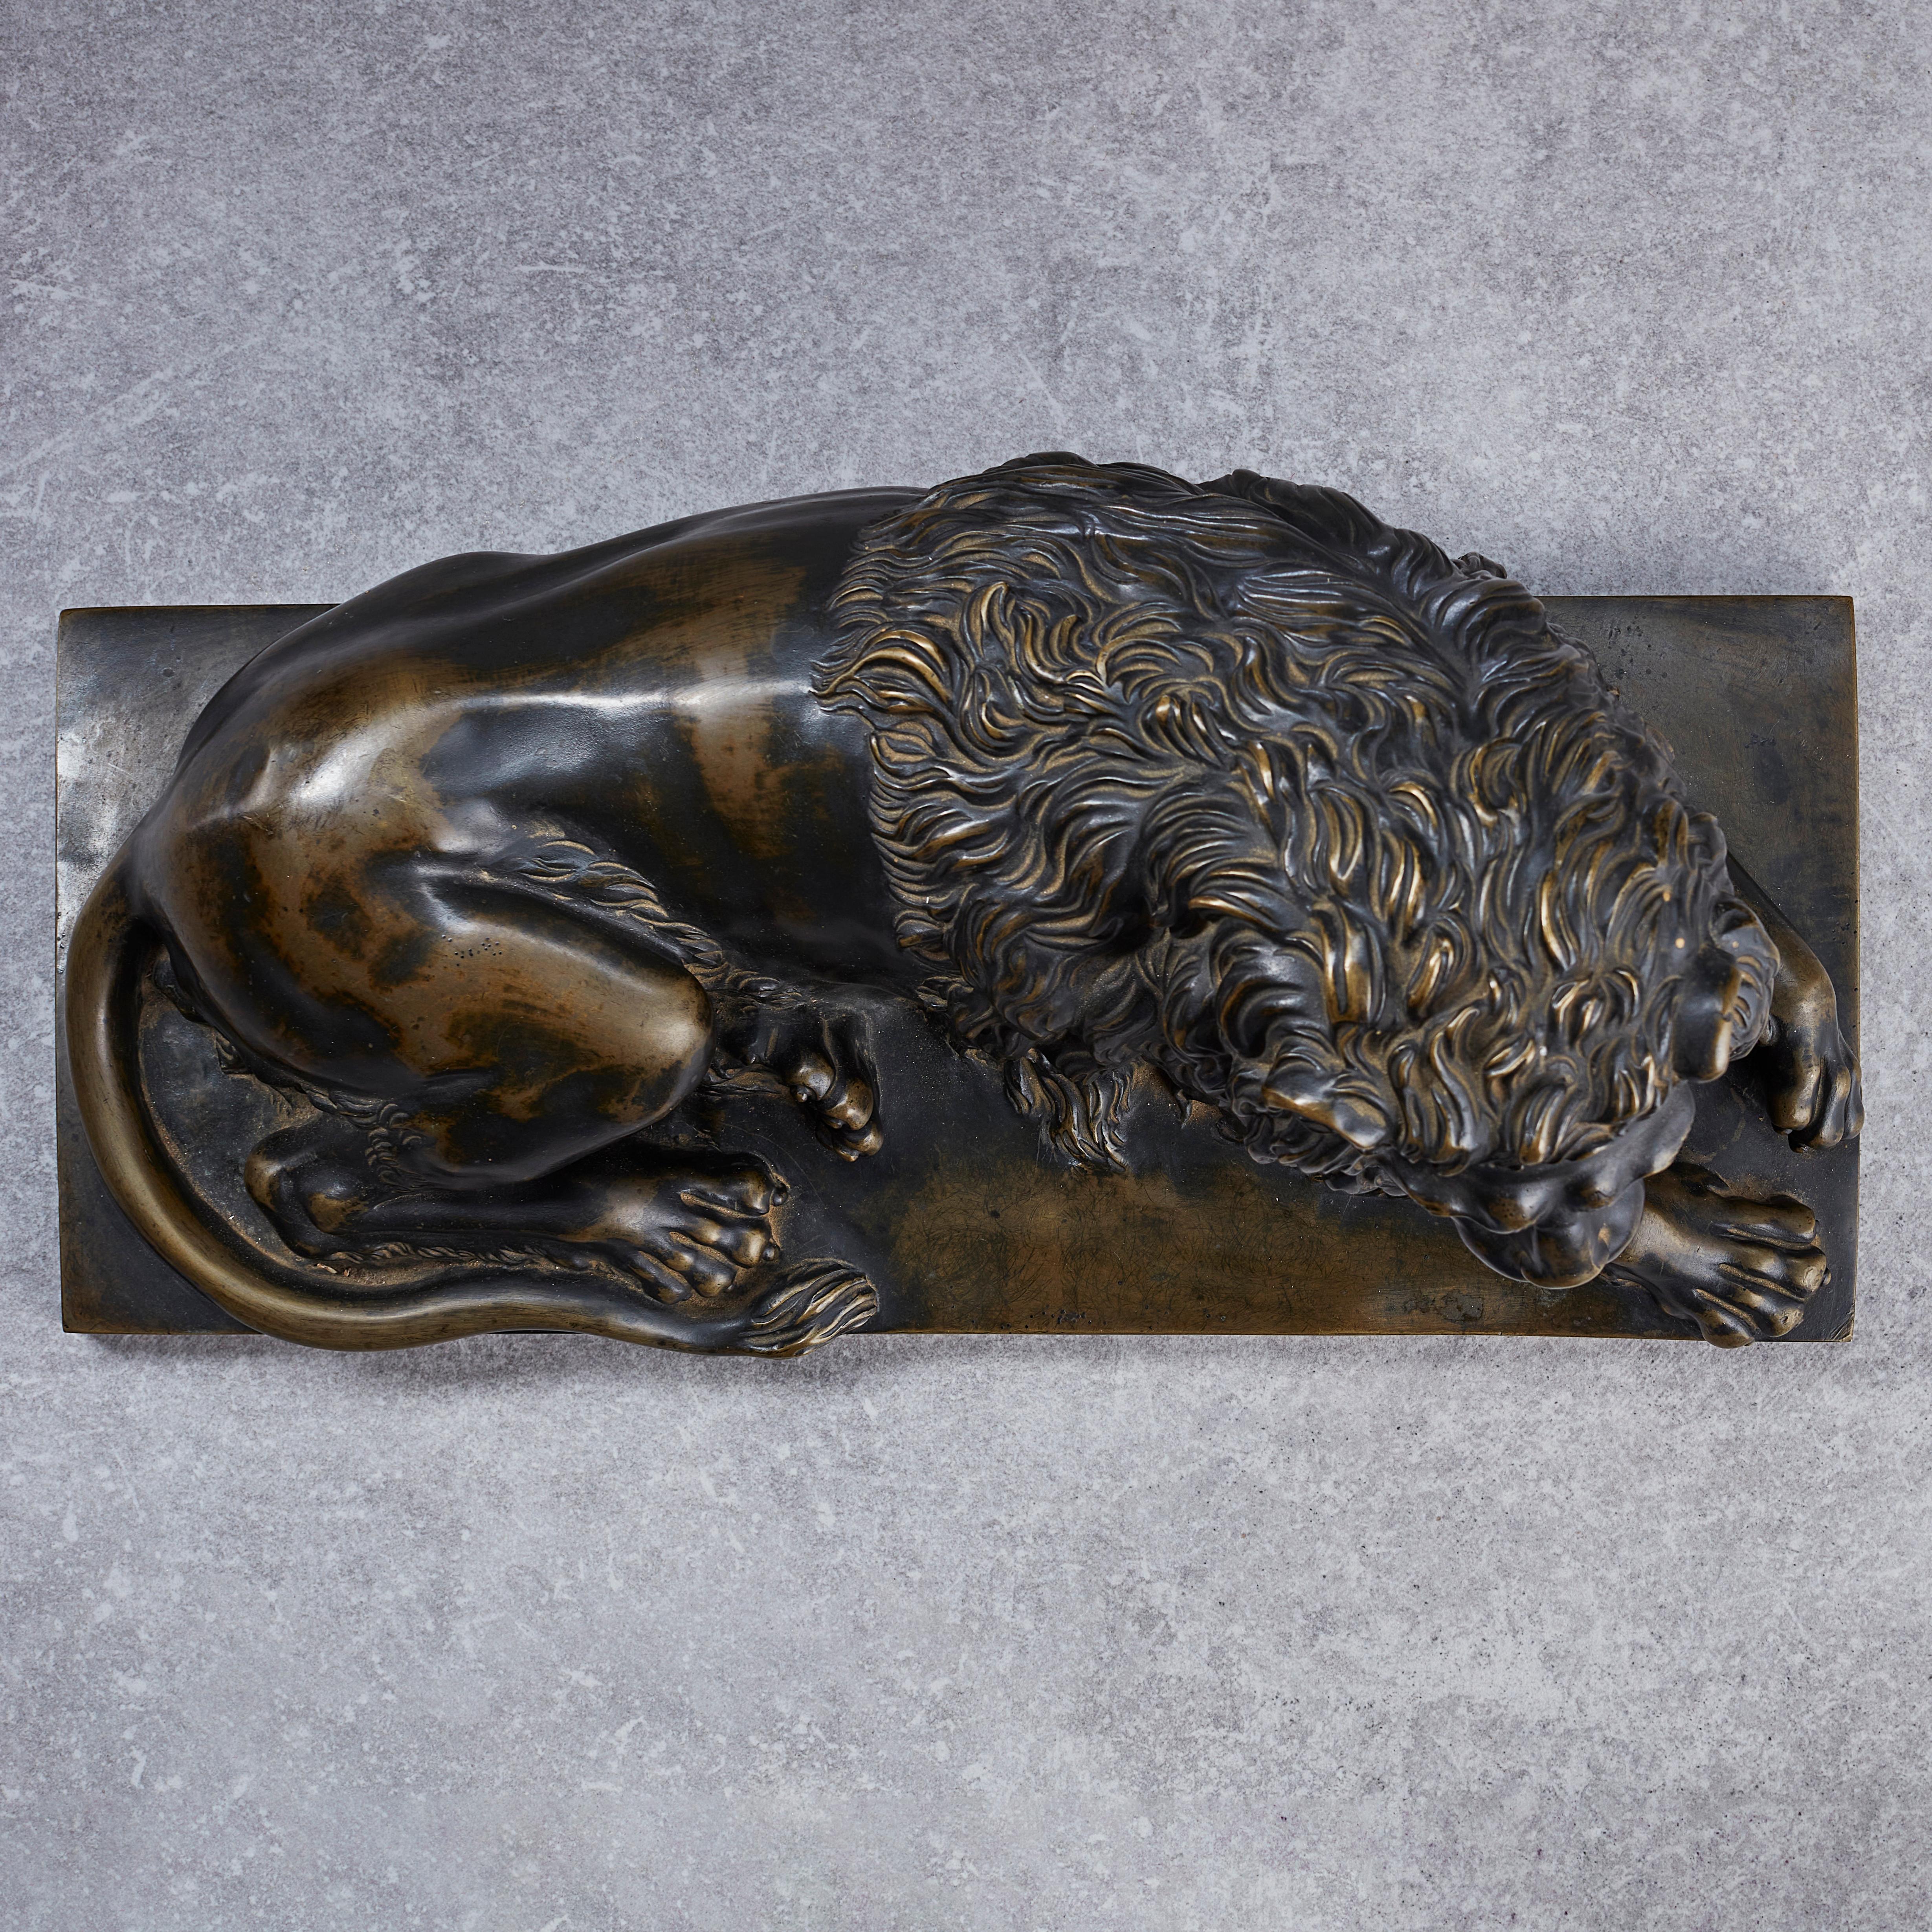 Very fine and large bronze of a reclining lion. Many details, such as the treatment of the lion’s mane demonstrate the sculptor’s mastery skill, as well as an understanding of the anatomy of this great beast. Wooden plinth with mahogany veneer, size